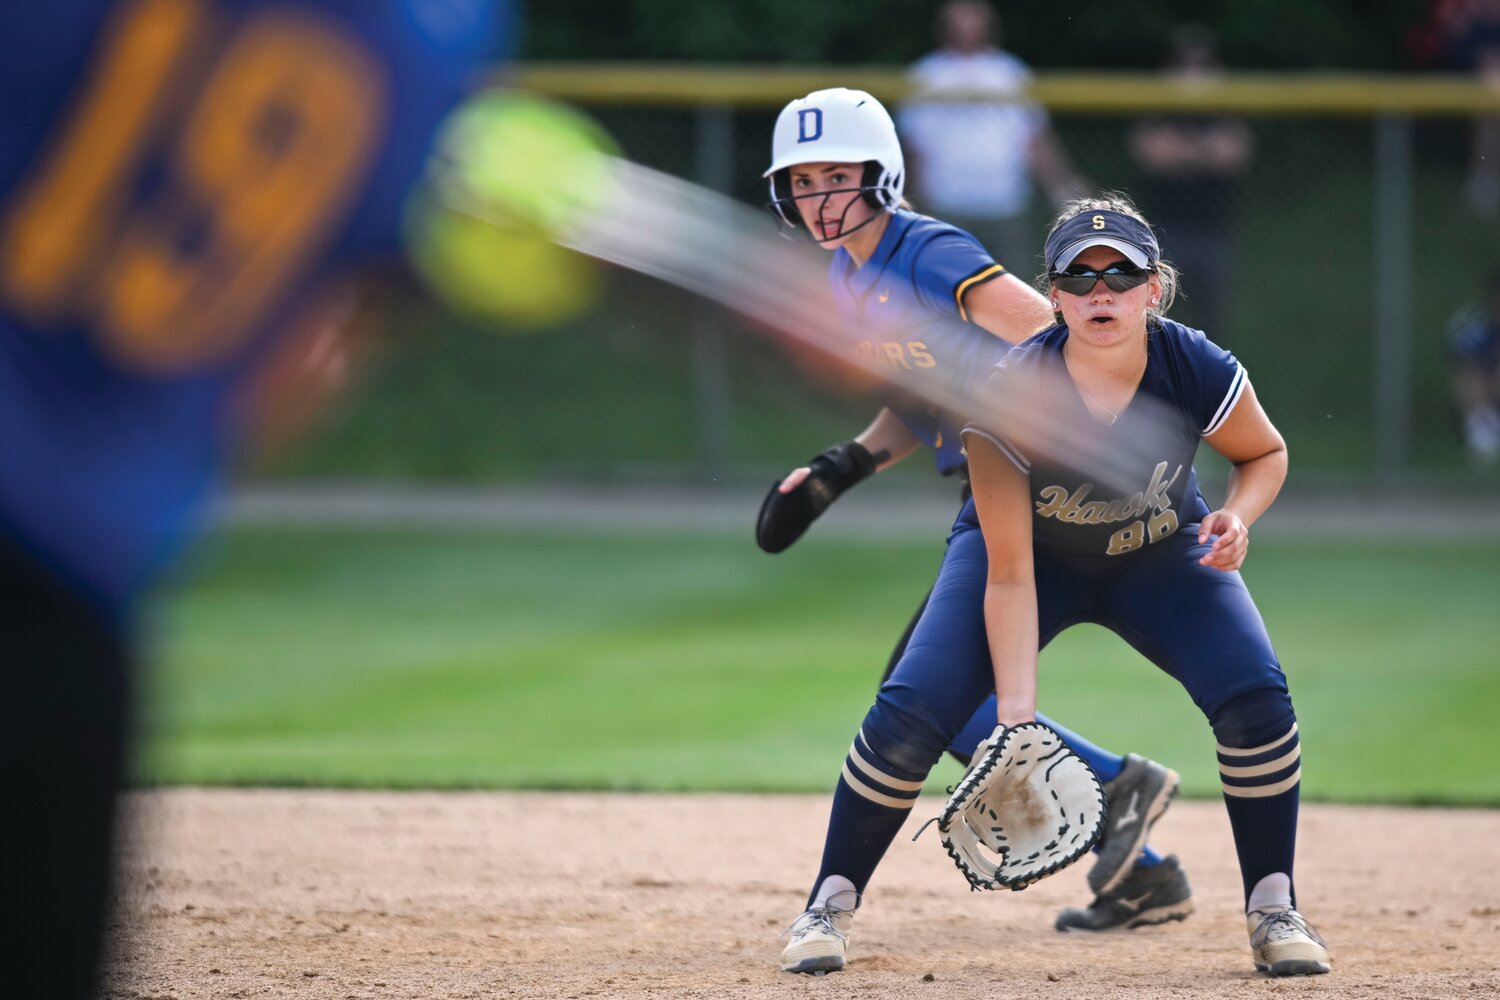 Council Rock South’s Julia Scannapieco eyes the ball hit by Downingtown East’s Rachael Schumann during the top of the fifth inning.